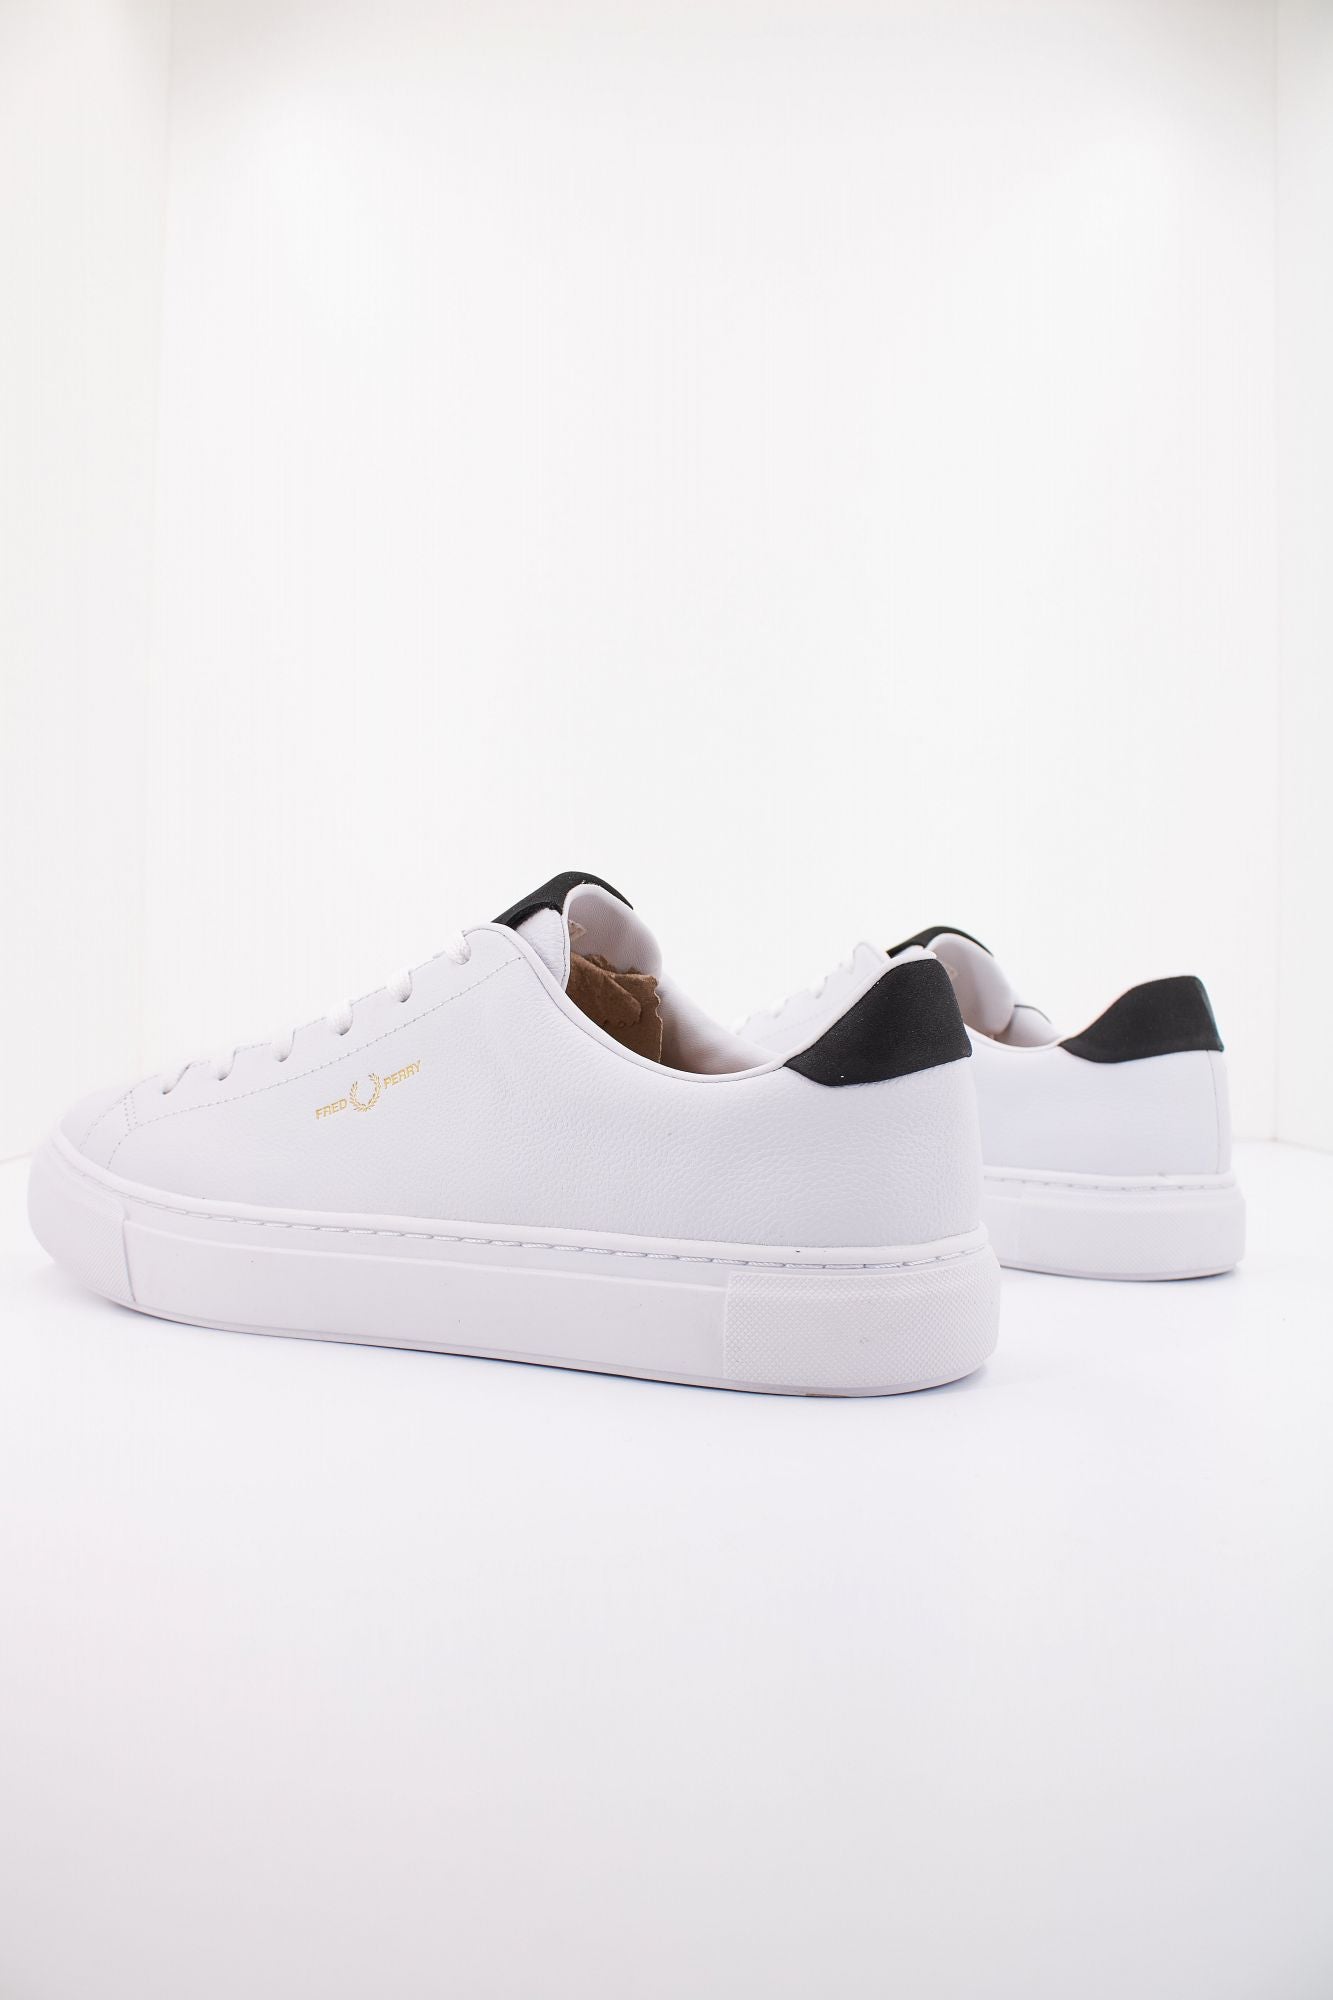 FRED PERRY B71 TUMBLED LEATHER en color BLANCO (3)